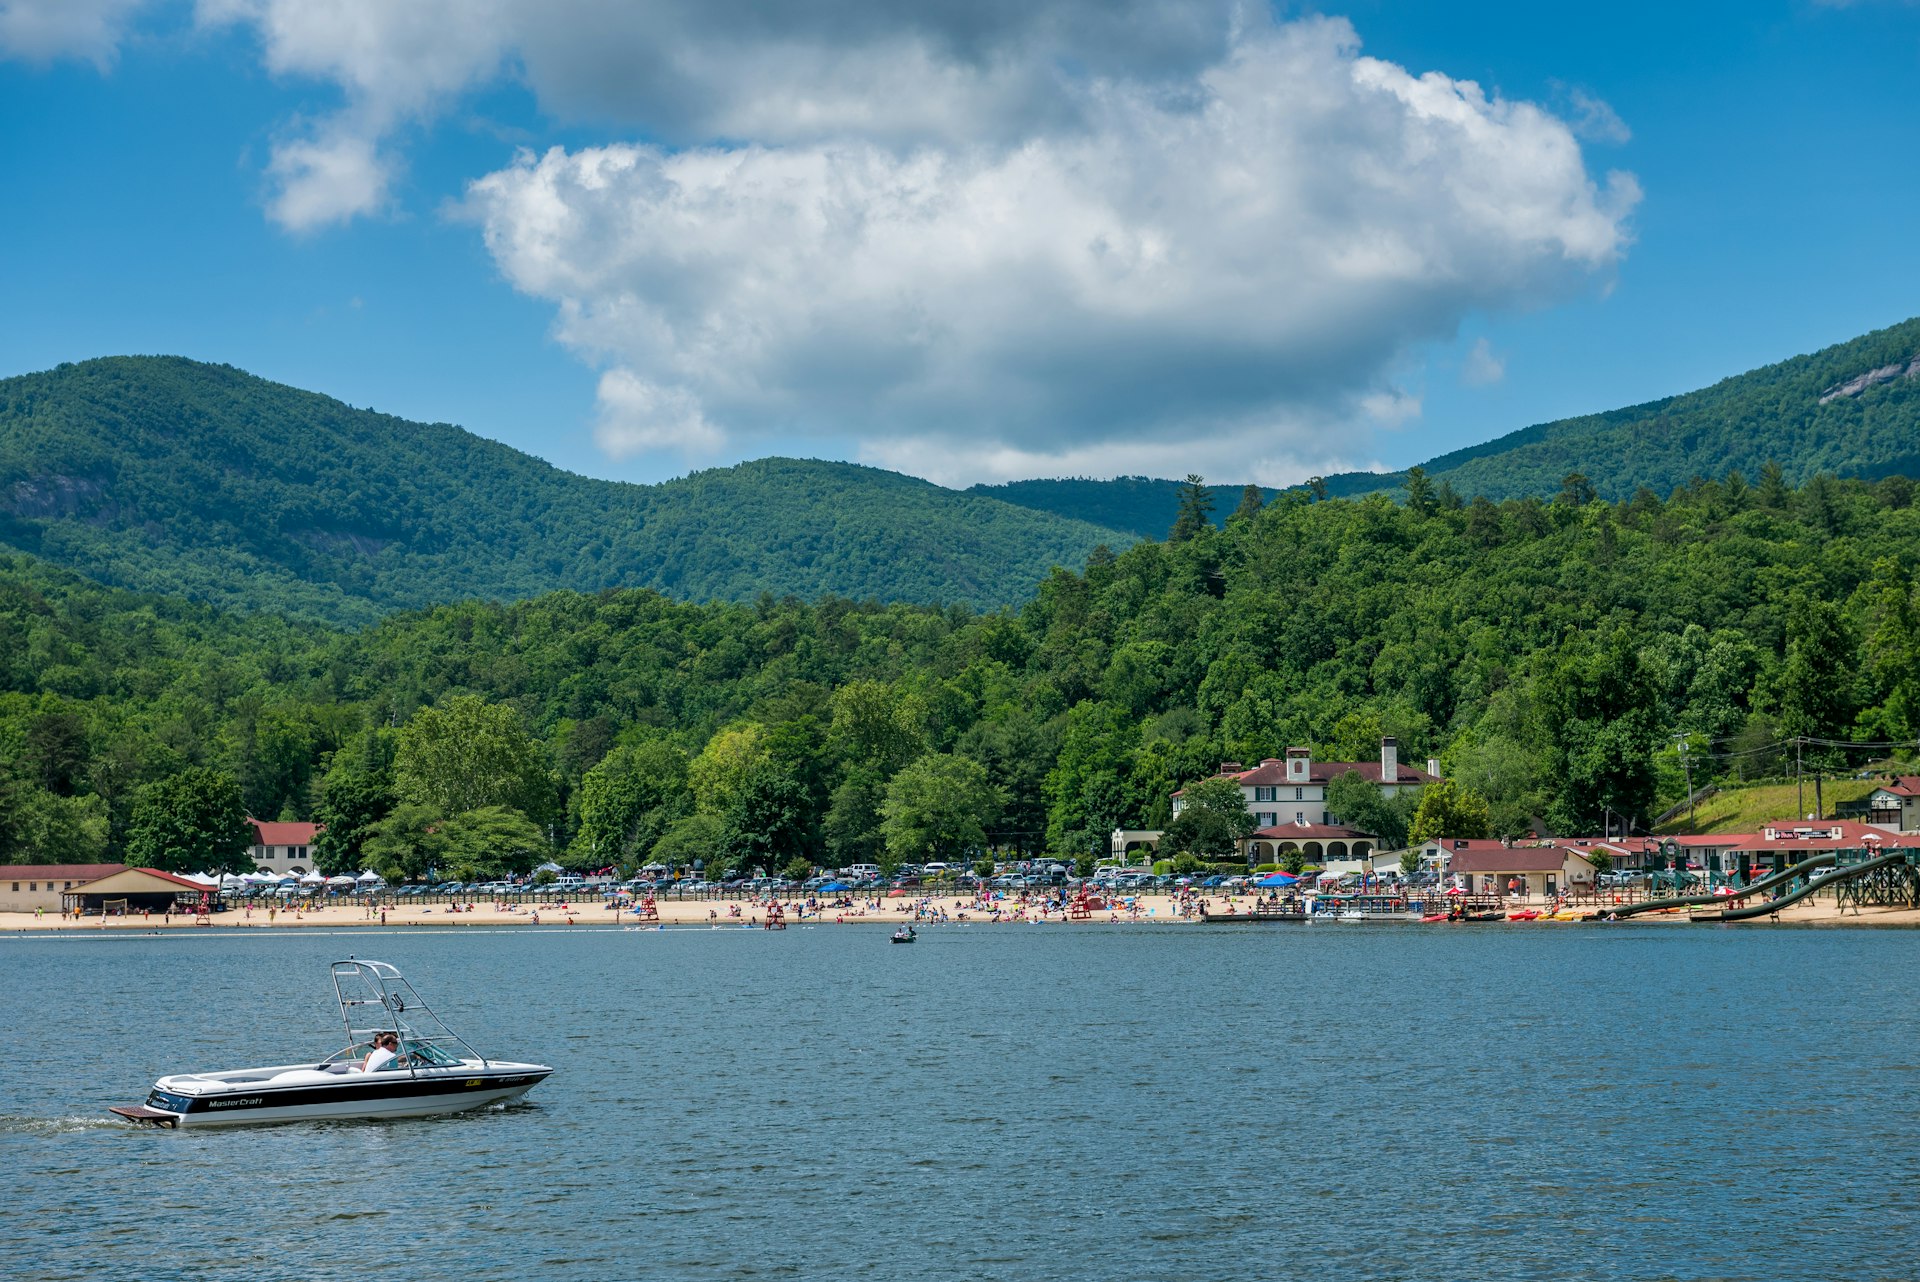 The beach at Lake Lure, North Carolina, in the early afternoon. People on the beach and boat in foreground. View of mountains in the background. 